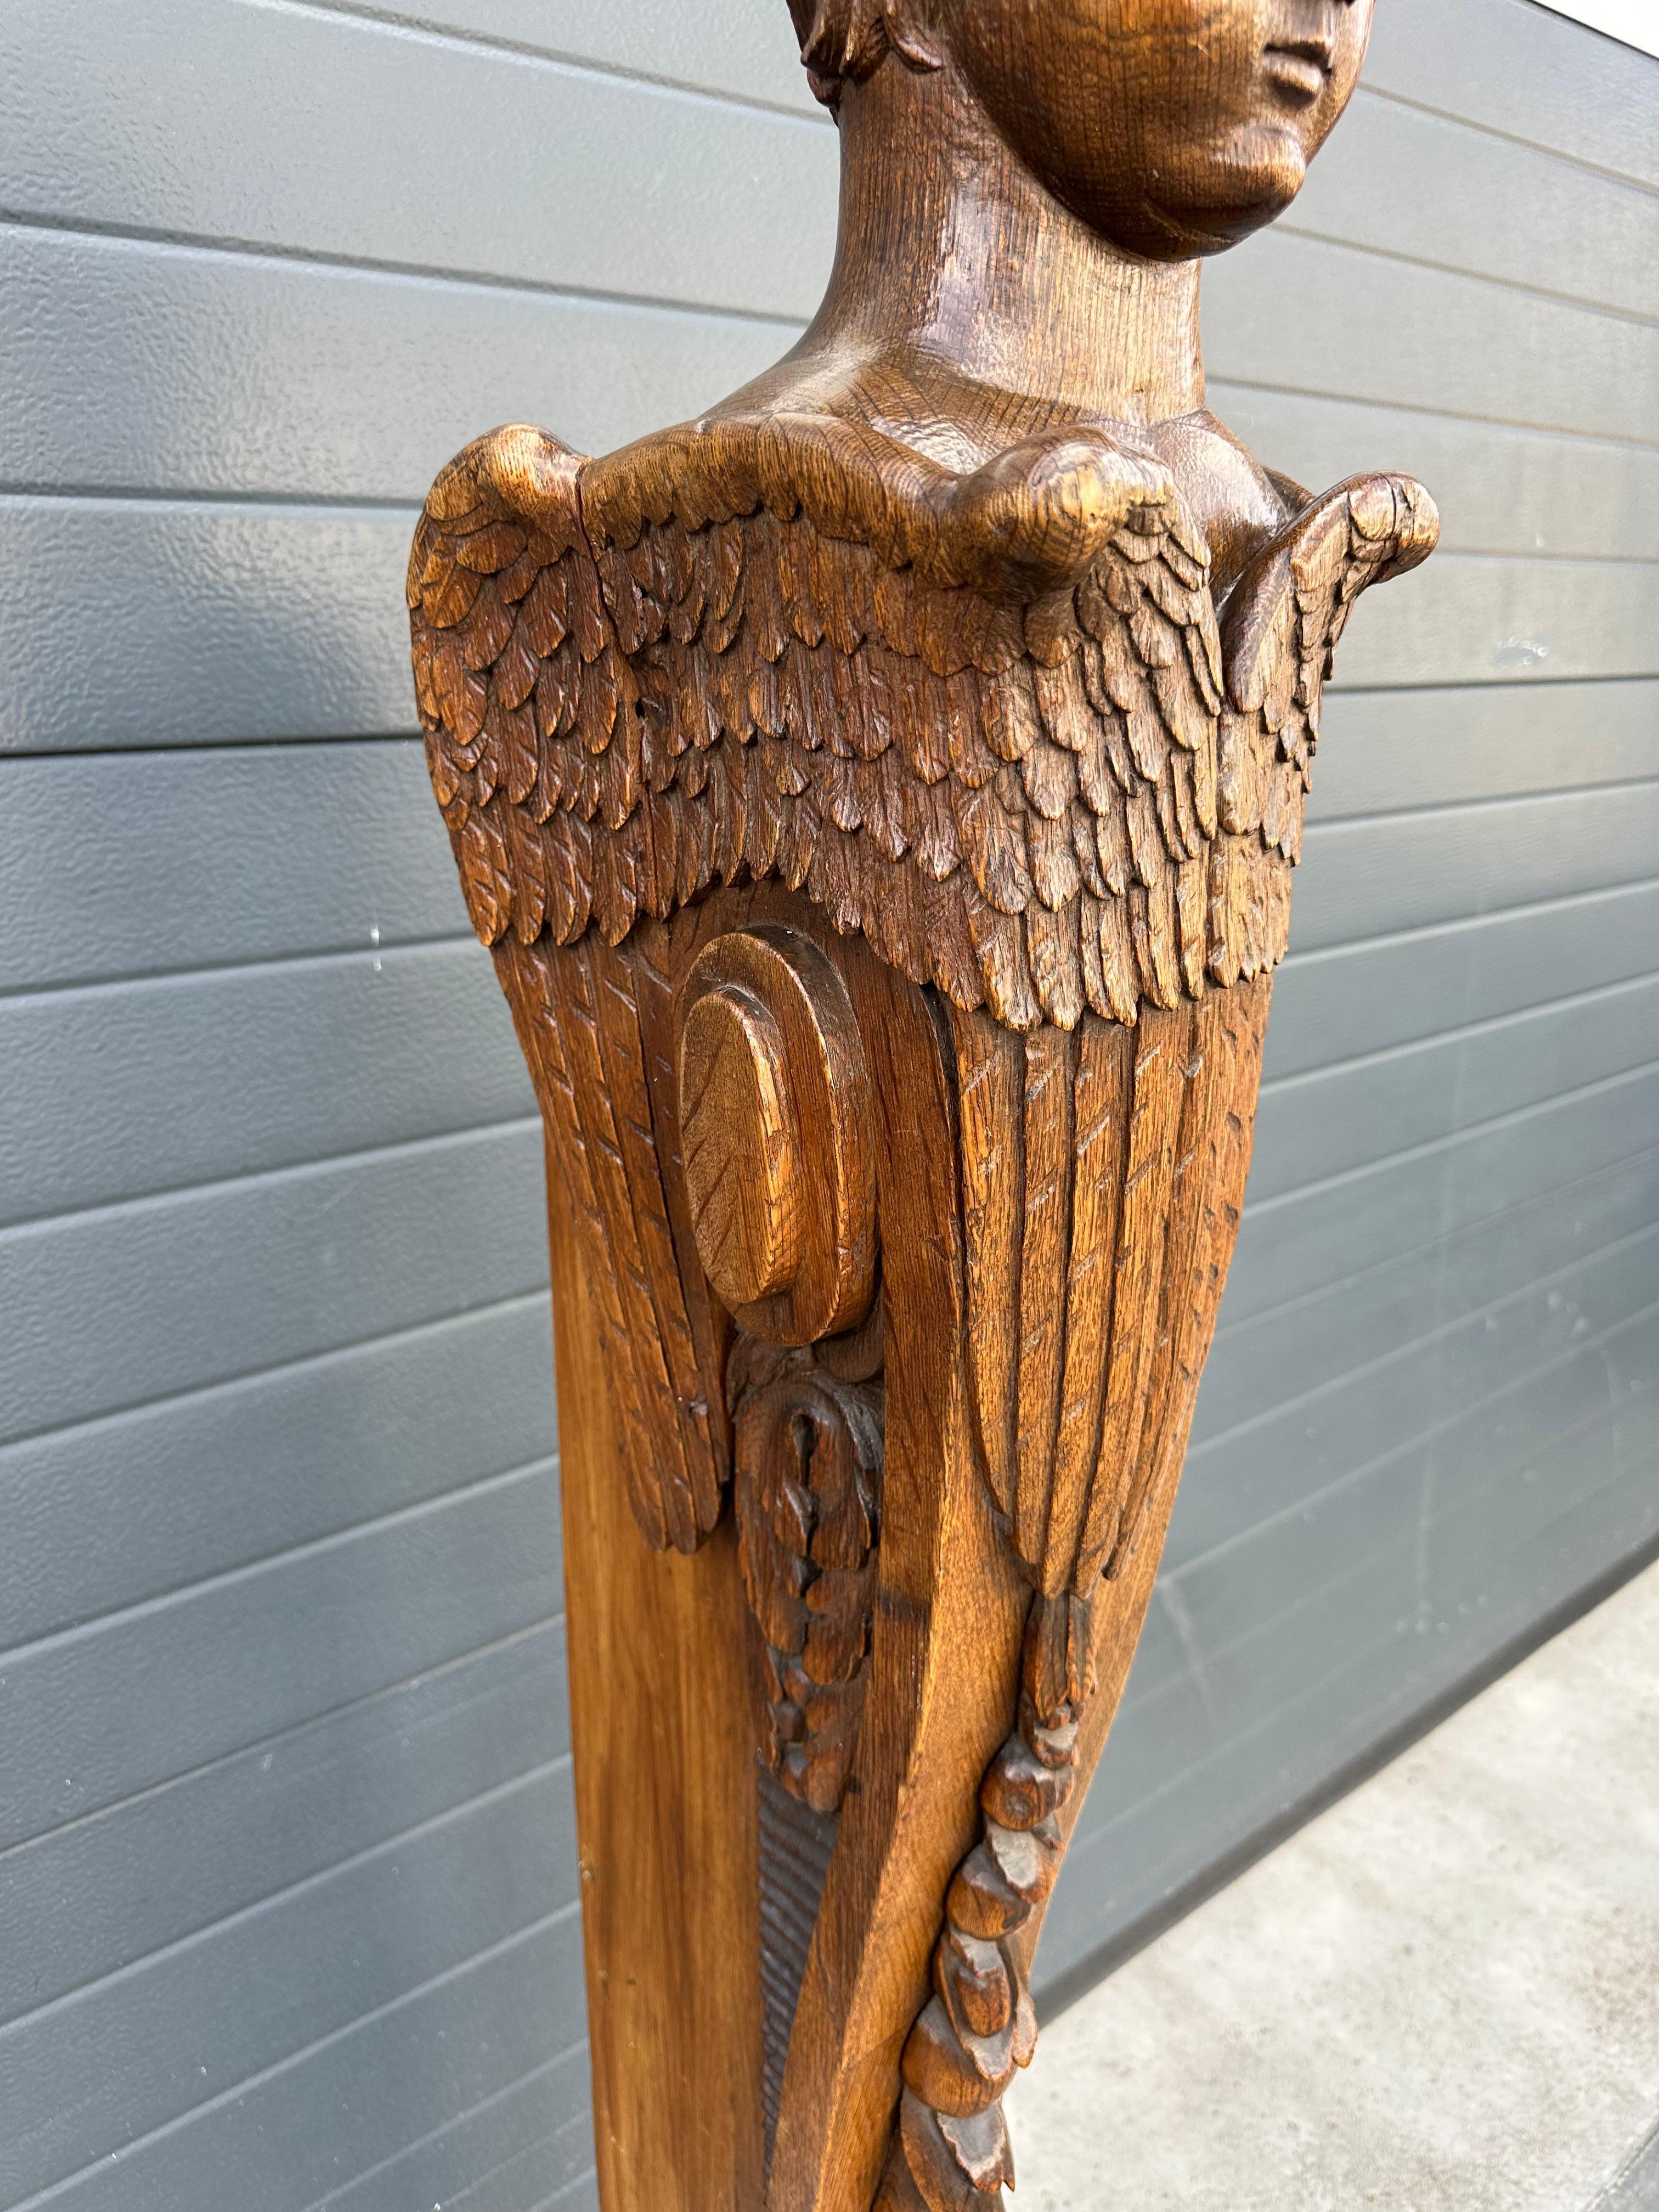 19th Century Antique Hand Carved Oak Stair Rail Newel Post w. Winged Angel Sculpture 19thC. For Sale